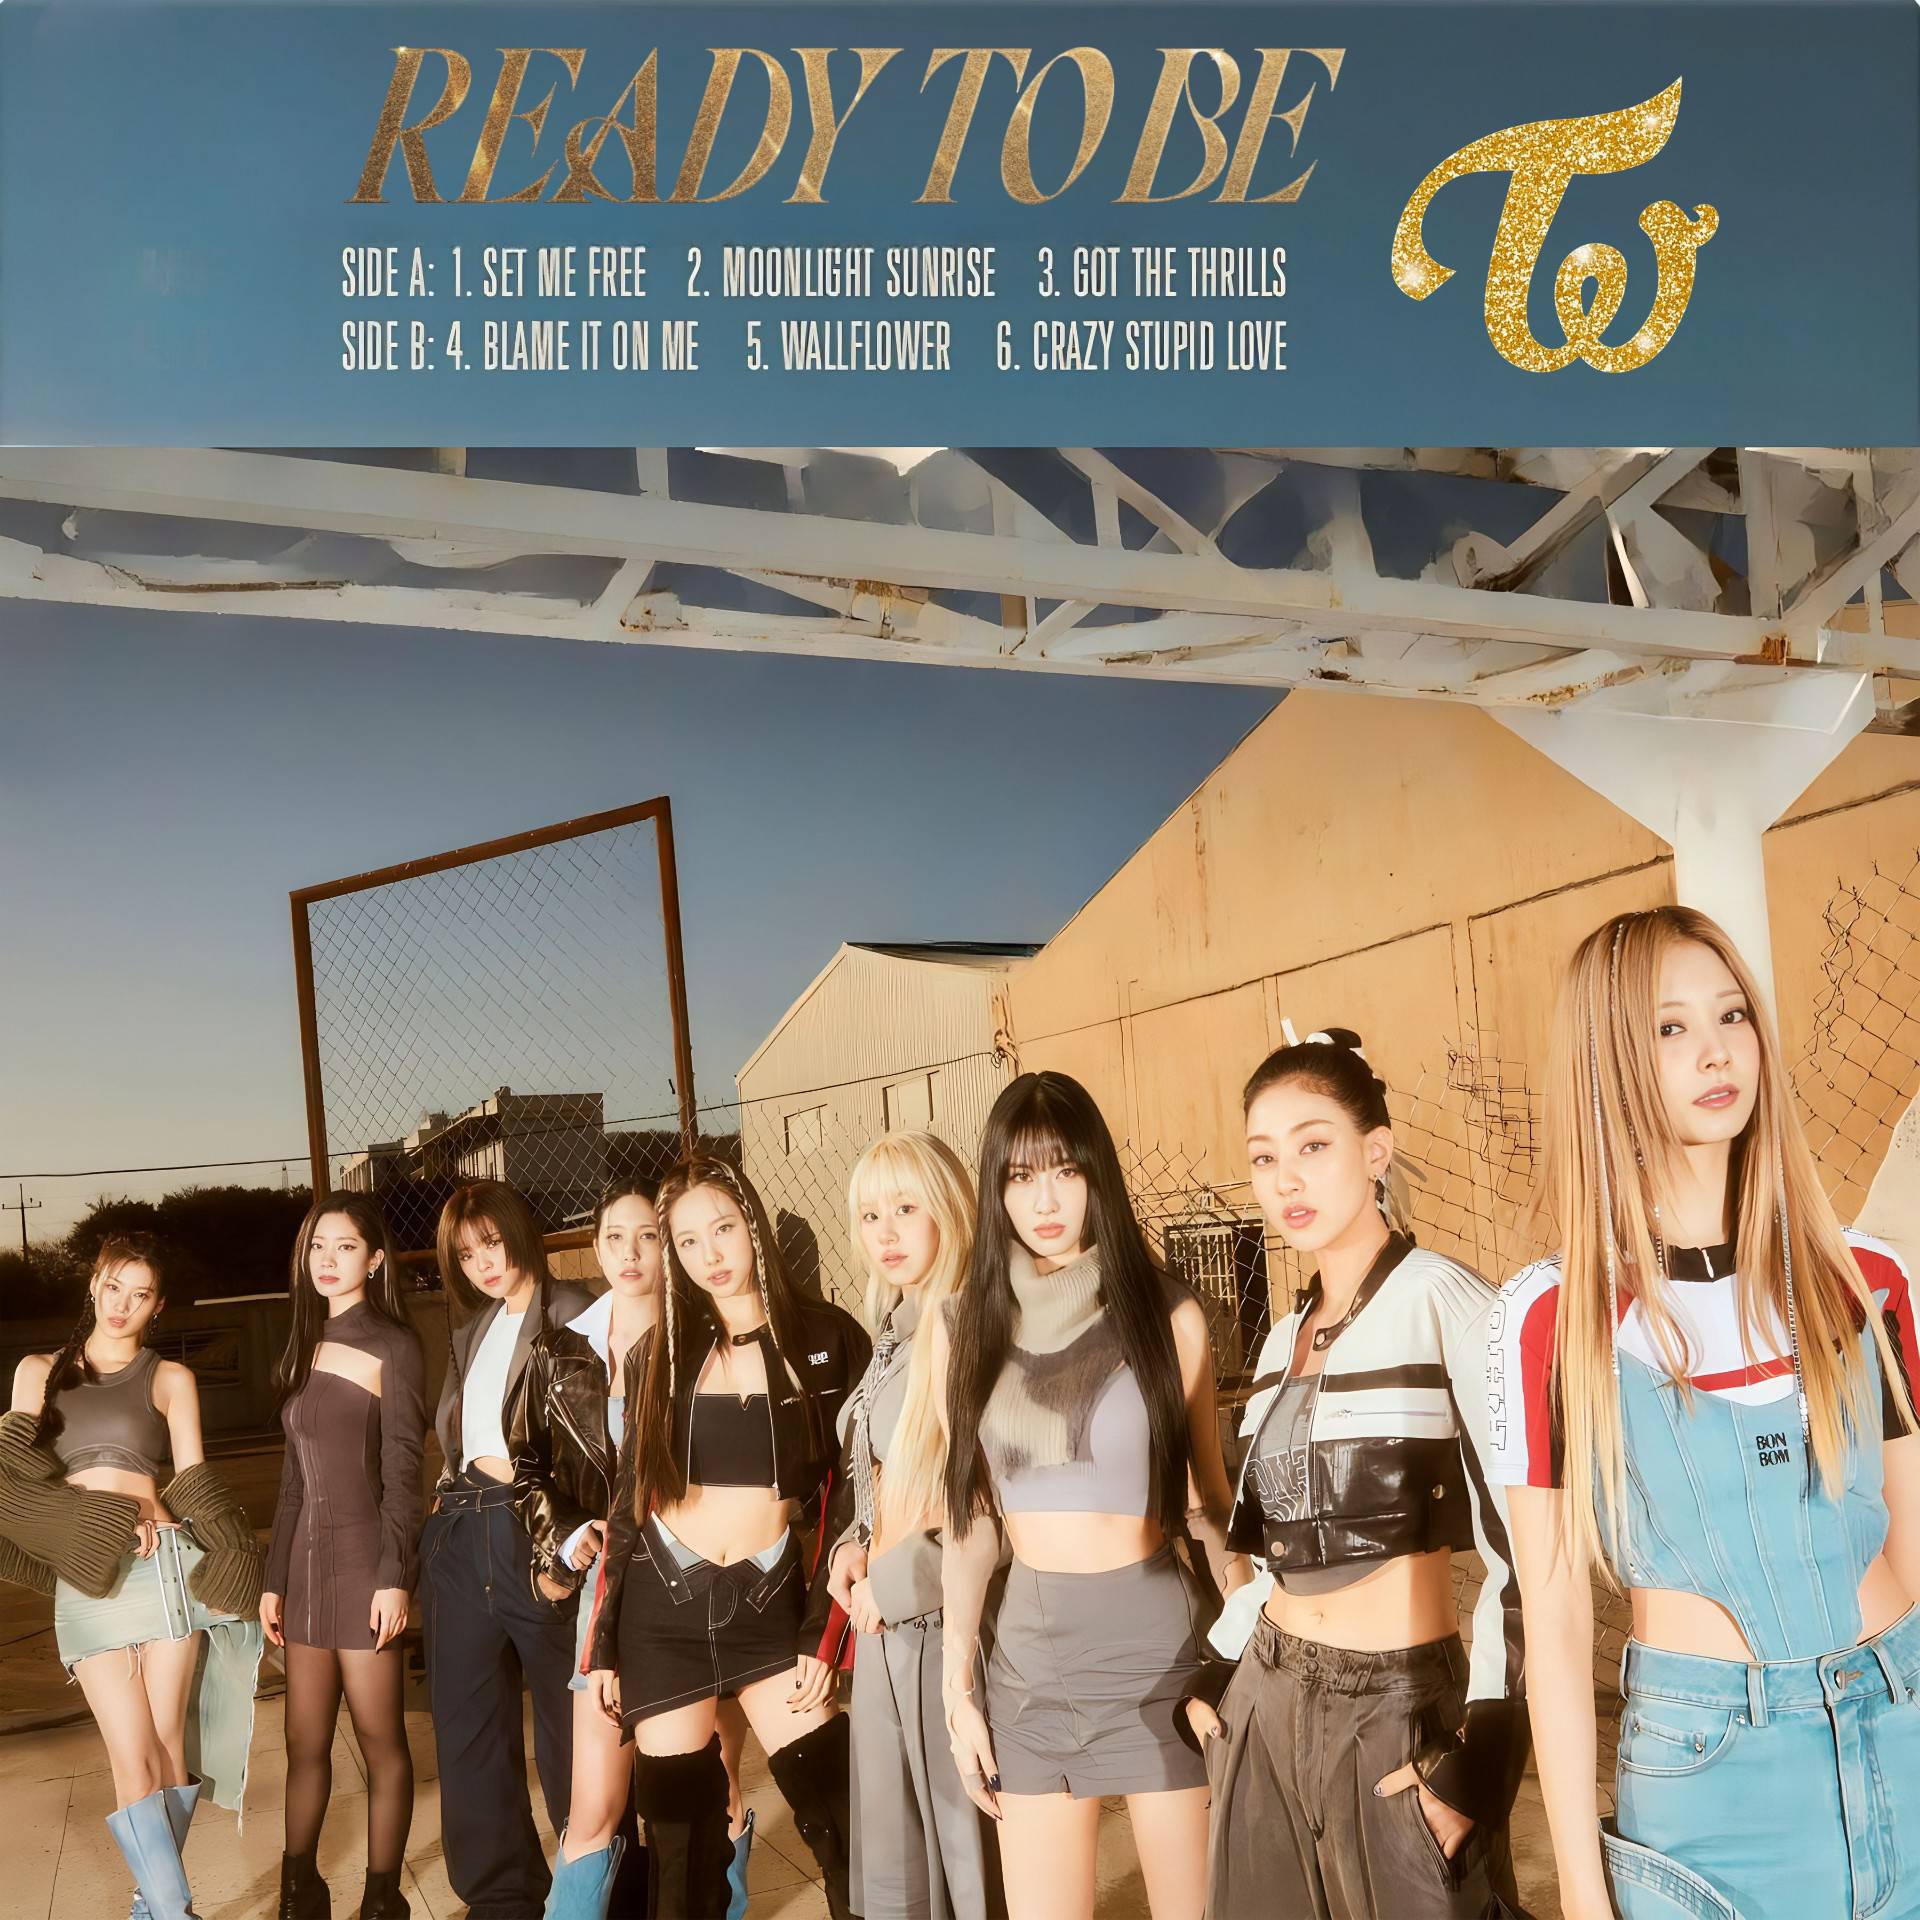 TWICE : 12th Mini Album - Ready To Be (00) by carieloveyou on DeviantArt